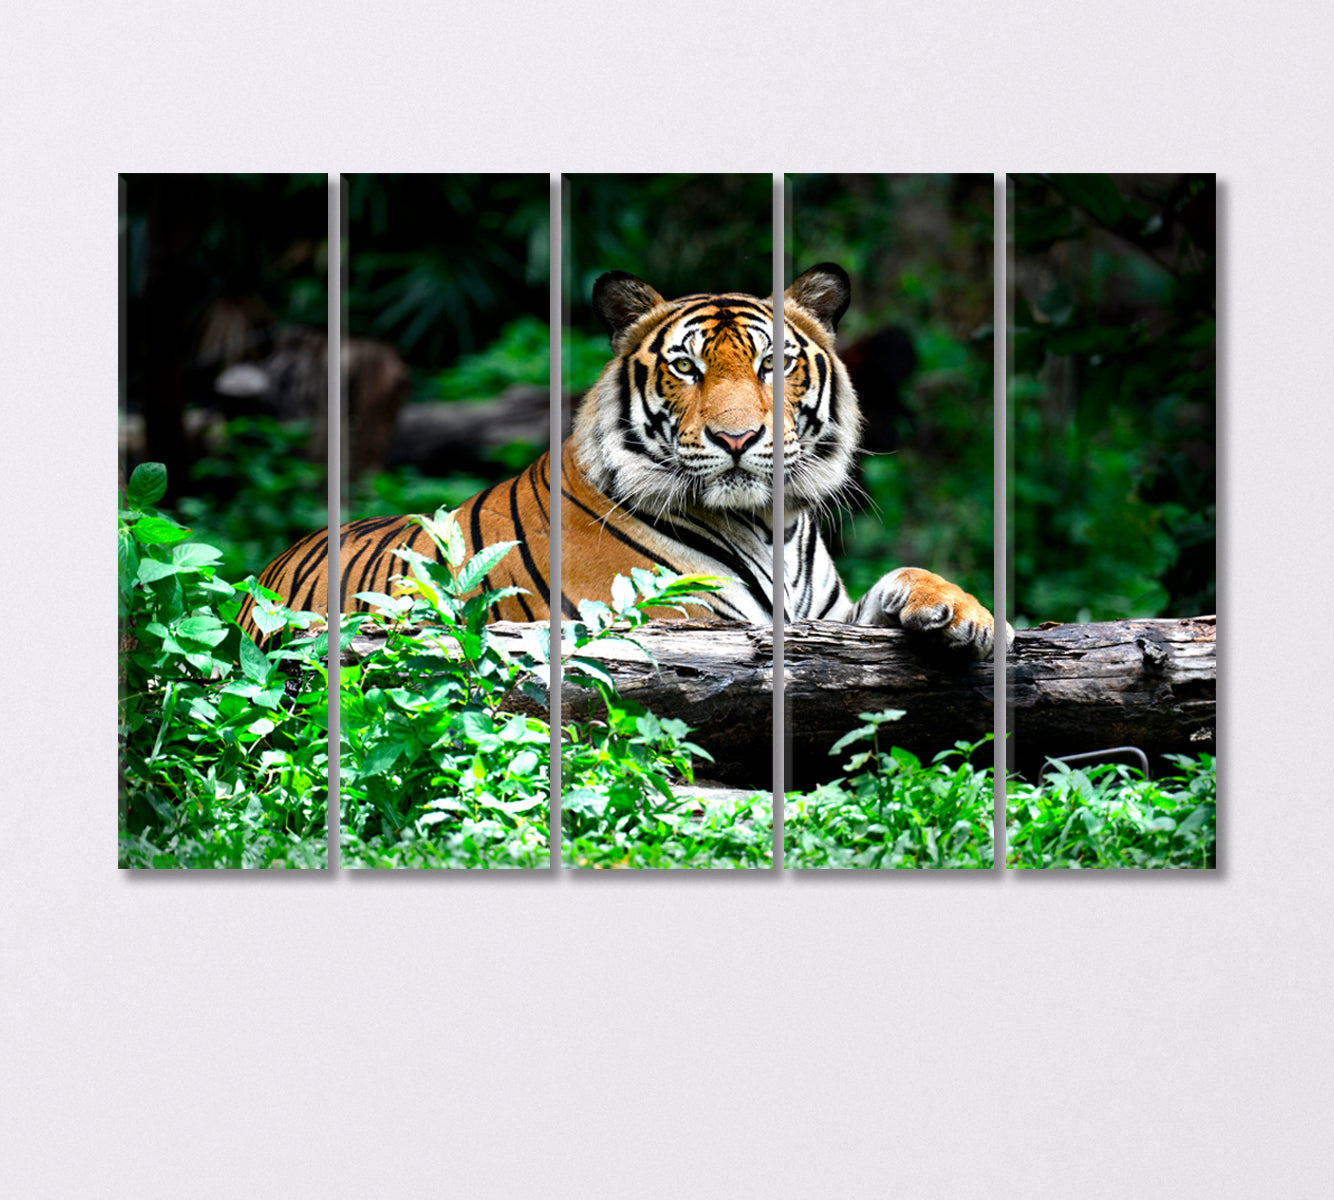 Bengal Tiger Resting in the Forest Canvas Print-Canvas Print-CetArt-5 Panels-36x24 inches-CetArt